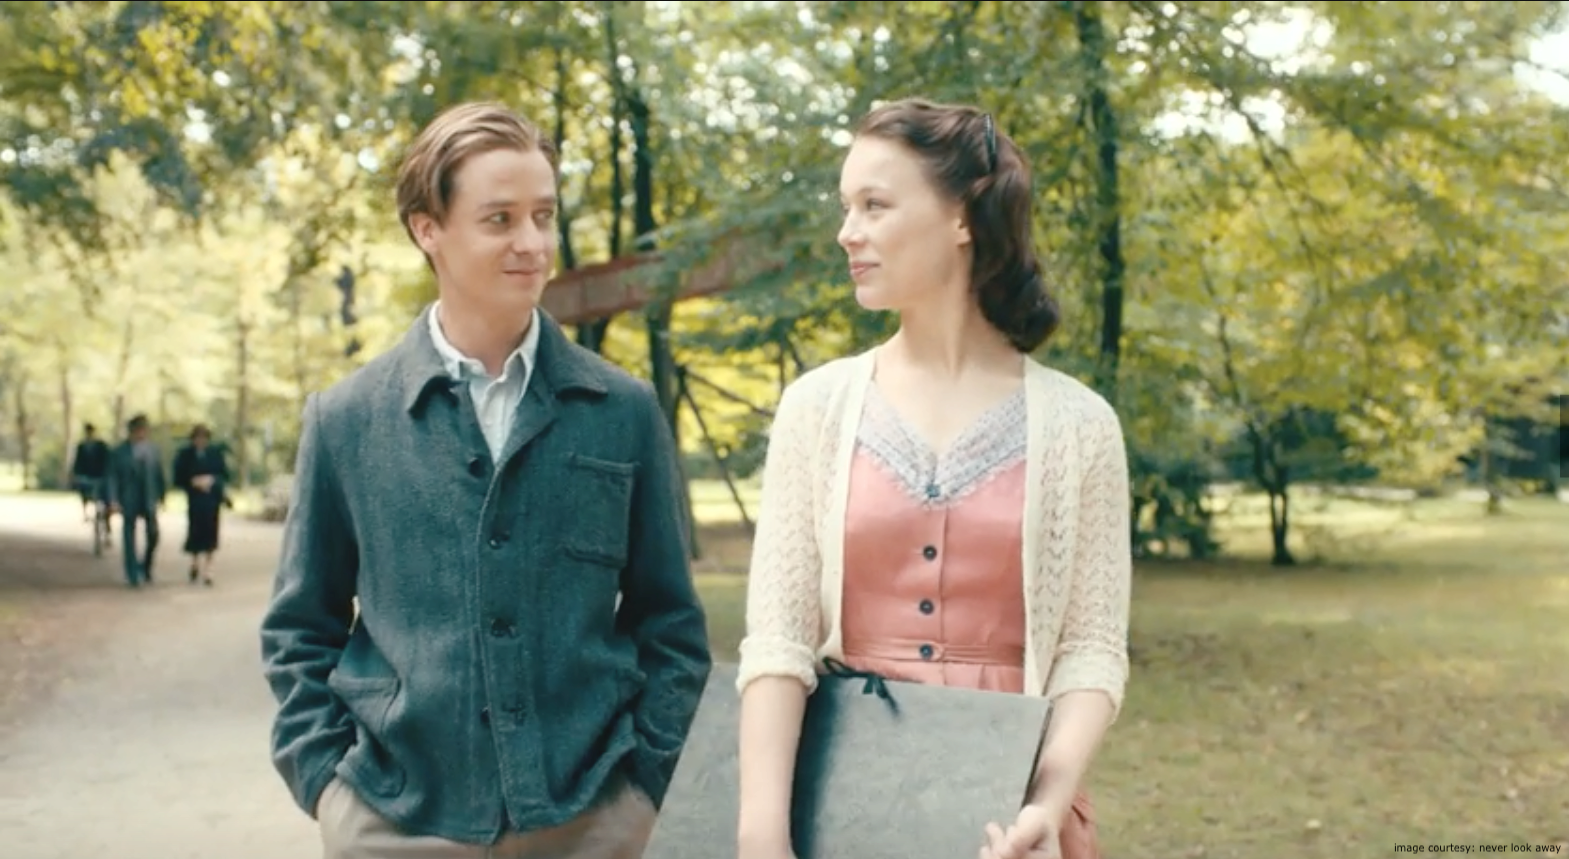 Never Look Away film still of Kurt Barnert (Edward Schilling) and Ellie Seeband (Paula Beer) on there first date walking in the park